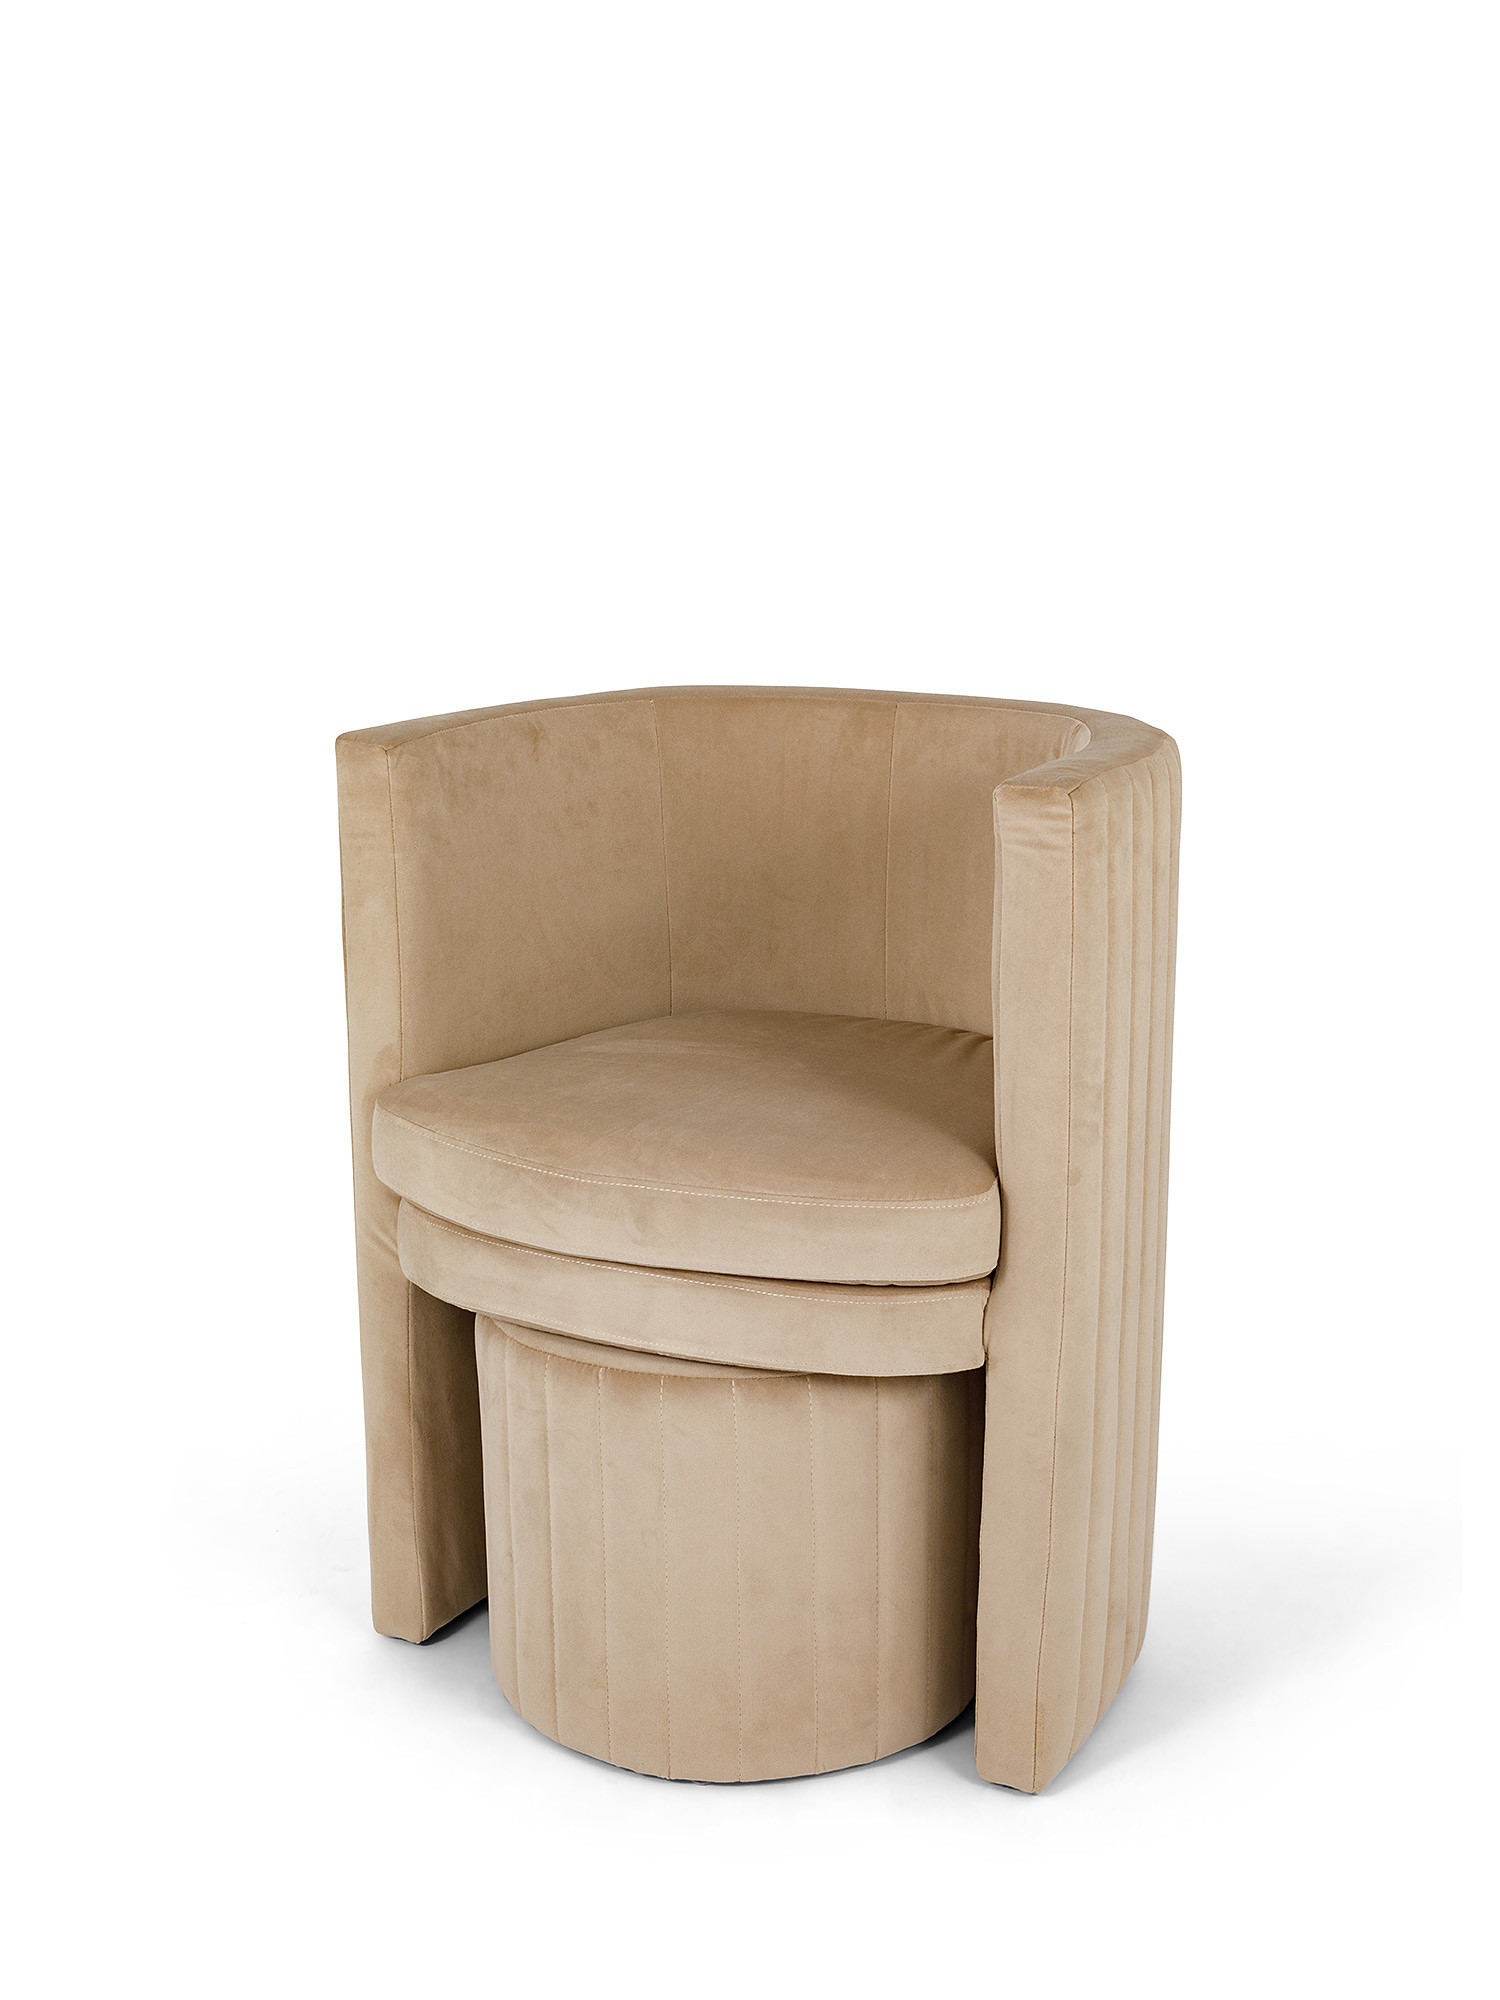 Round velvet armchair and stool set, Beige, large image number 1